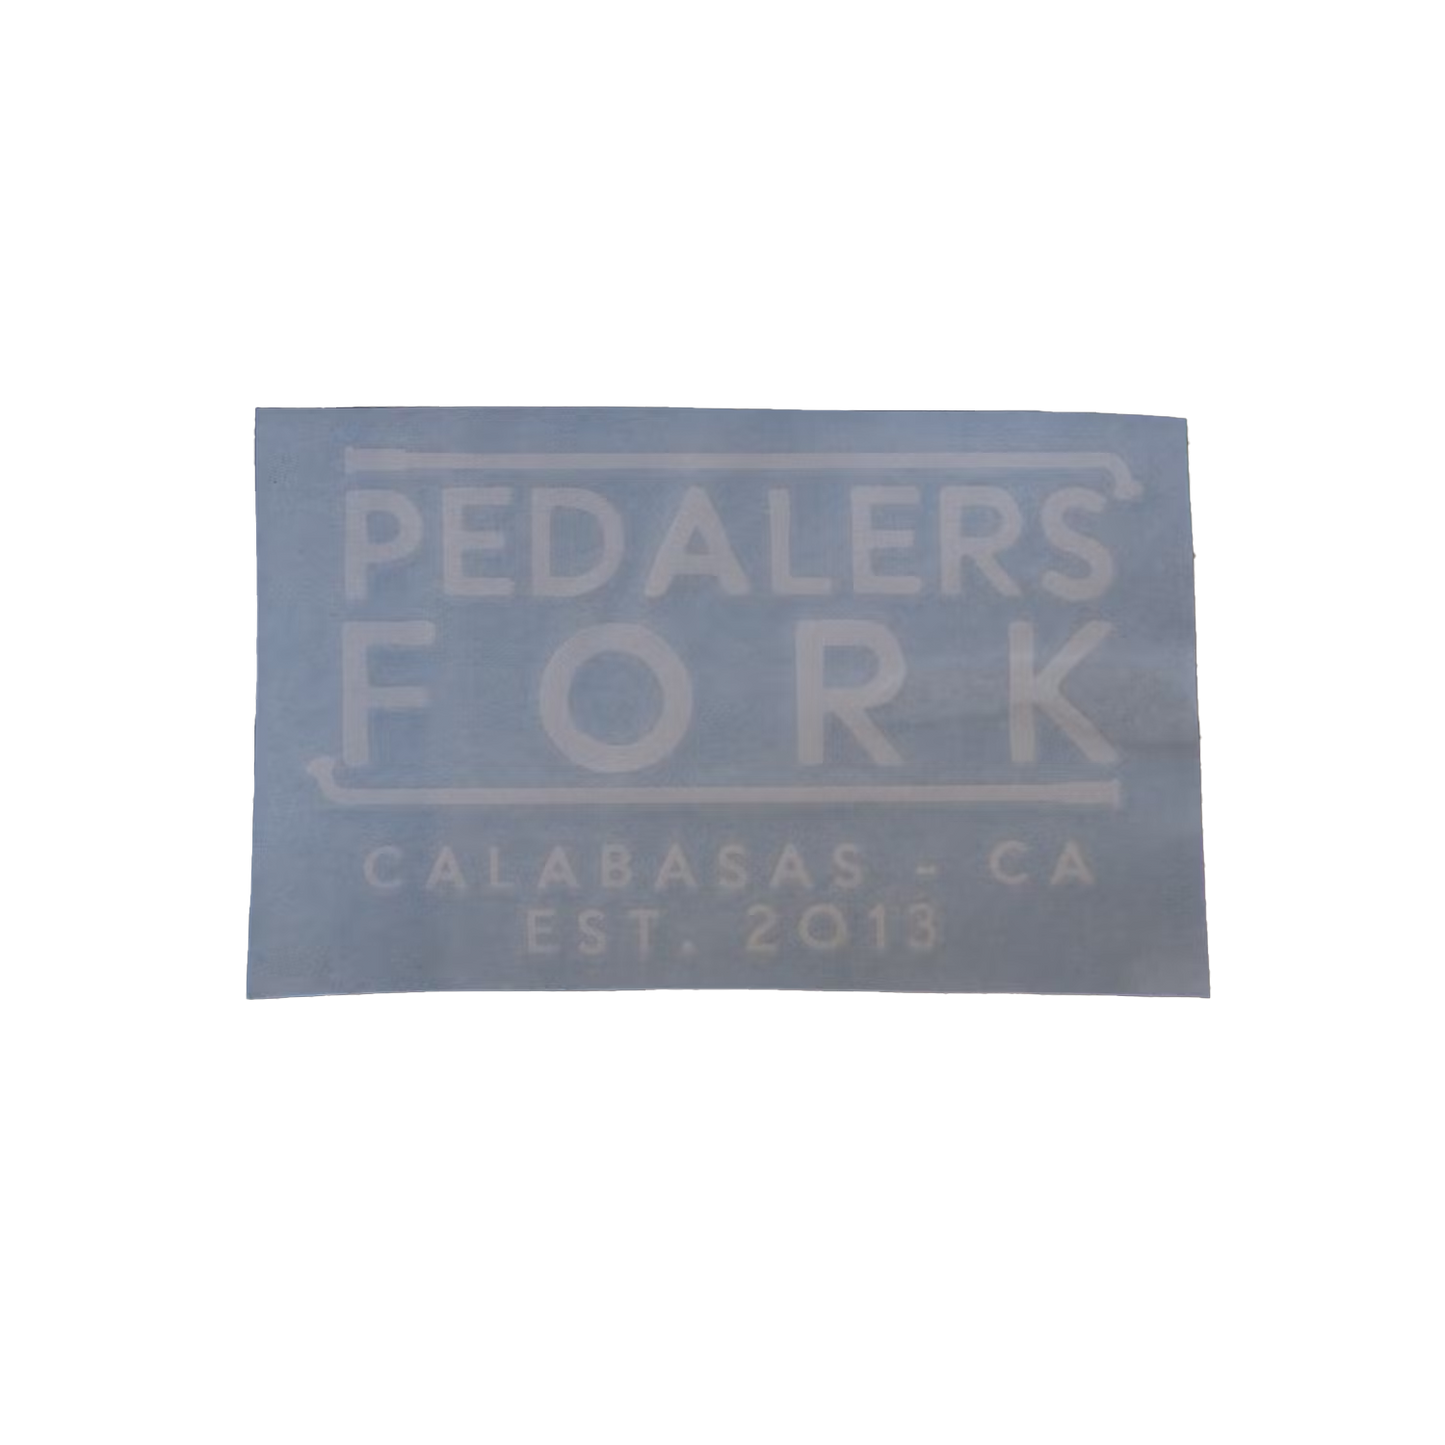 Vinyl Sticker with Pedalers Fork logo and text "Calabasas, CA EST. 2013"